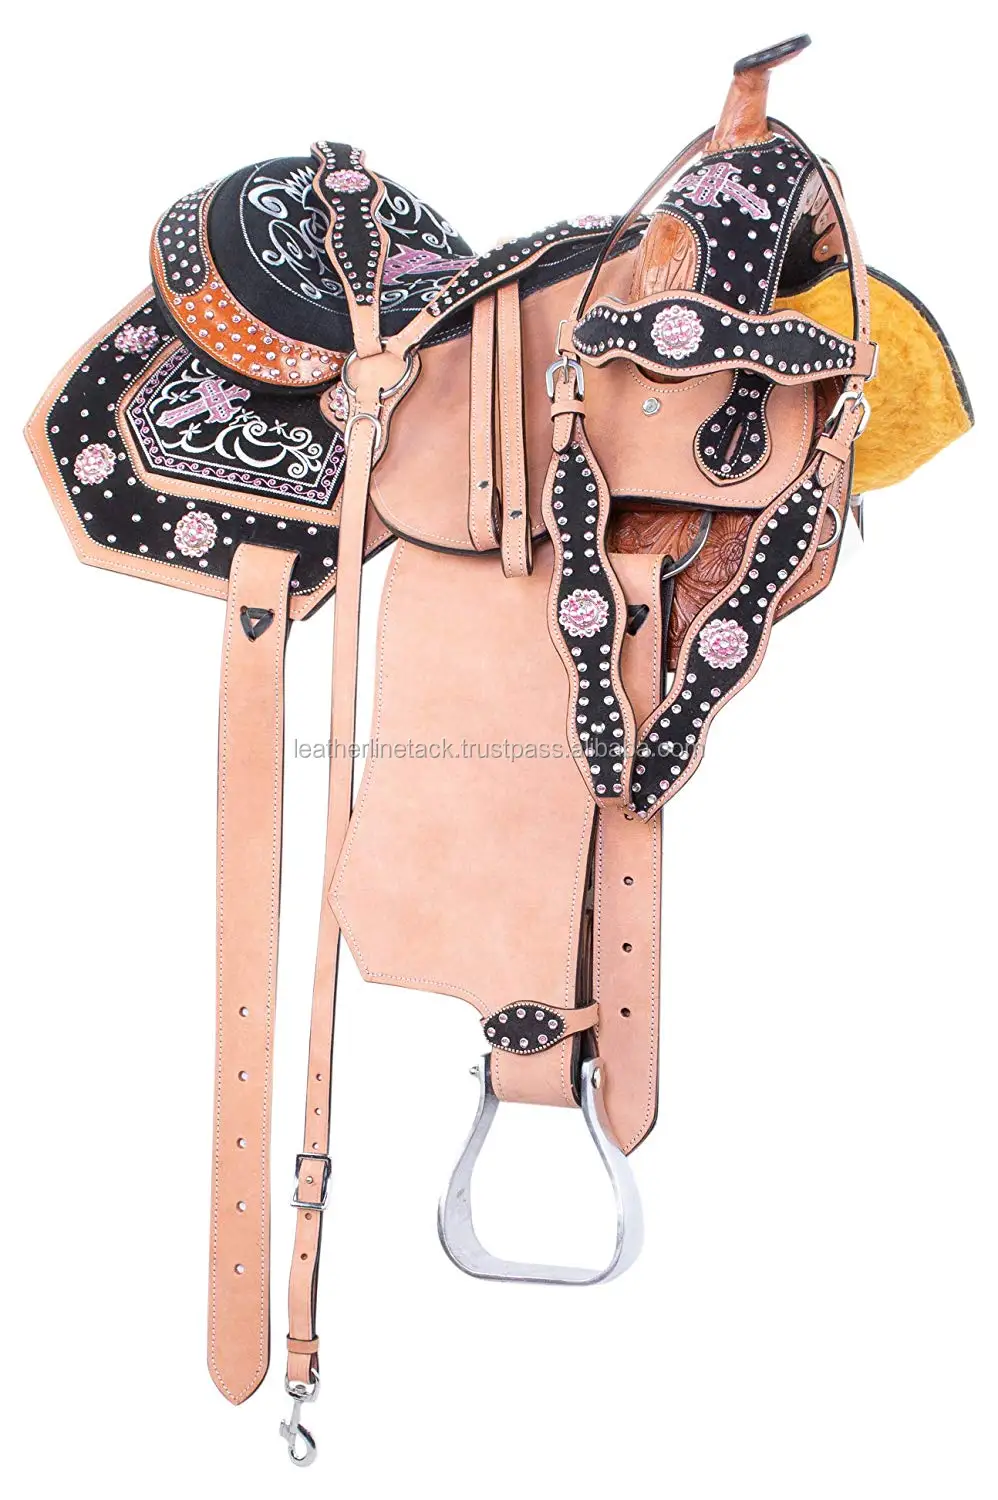 11 Headstall & Breast Collar Y&Z Enterprises 10 12 Youth Child Synthetic Western Pony Horse Saddle Barrel Racing Tack